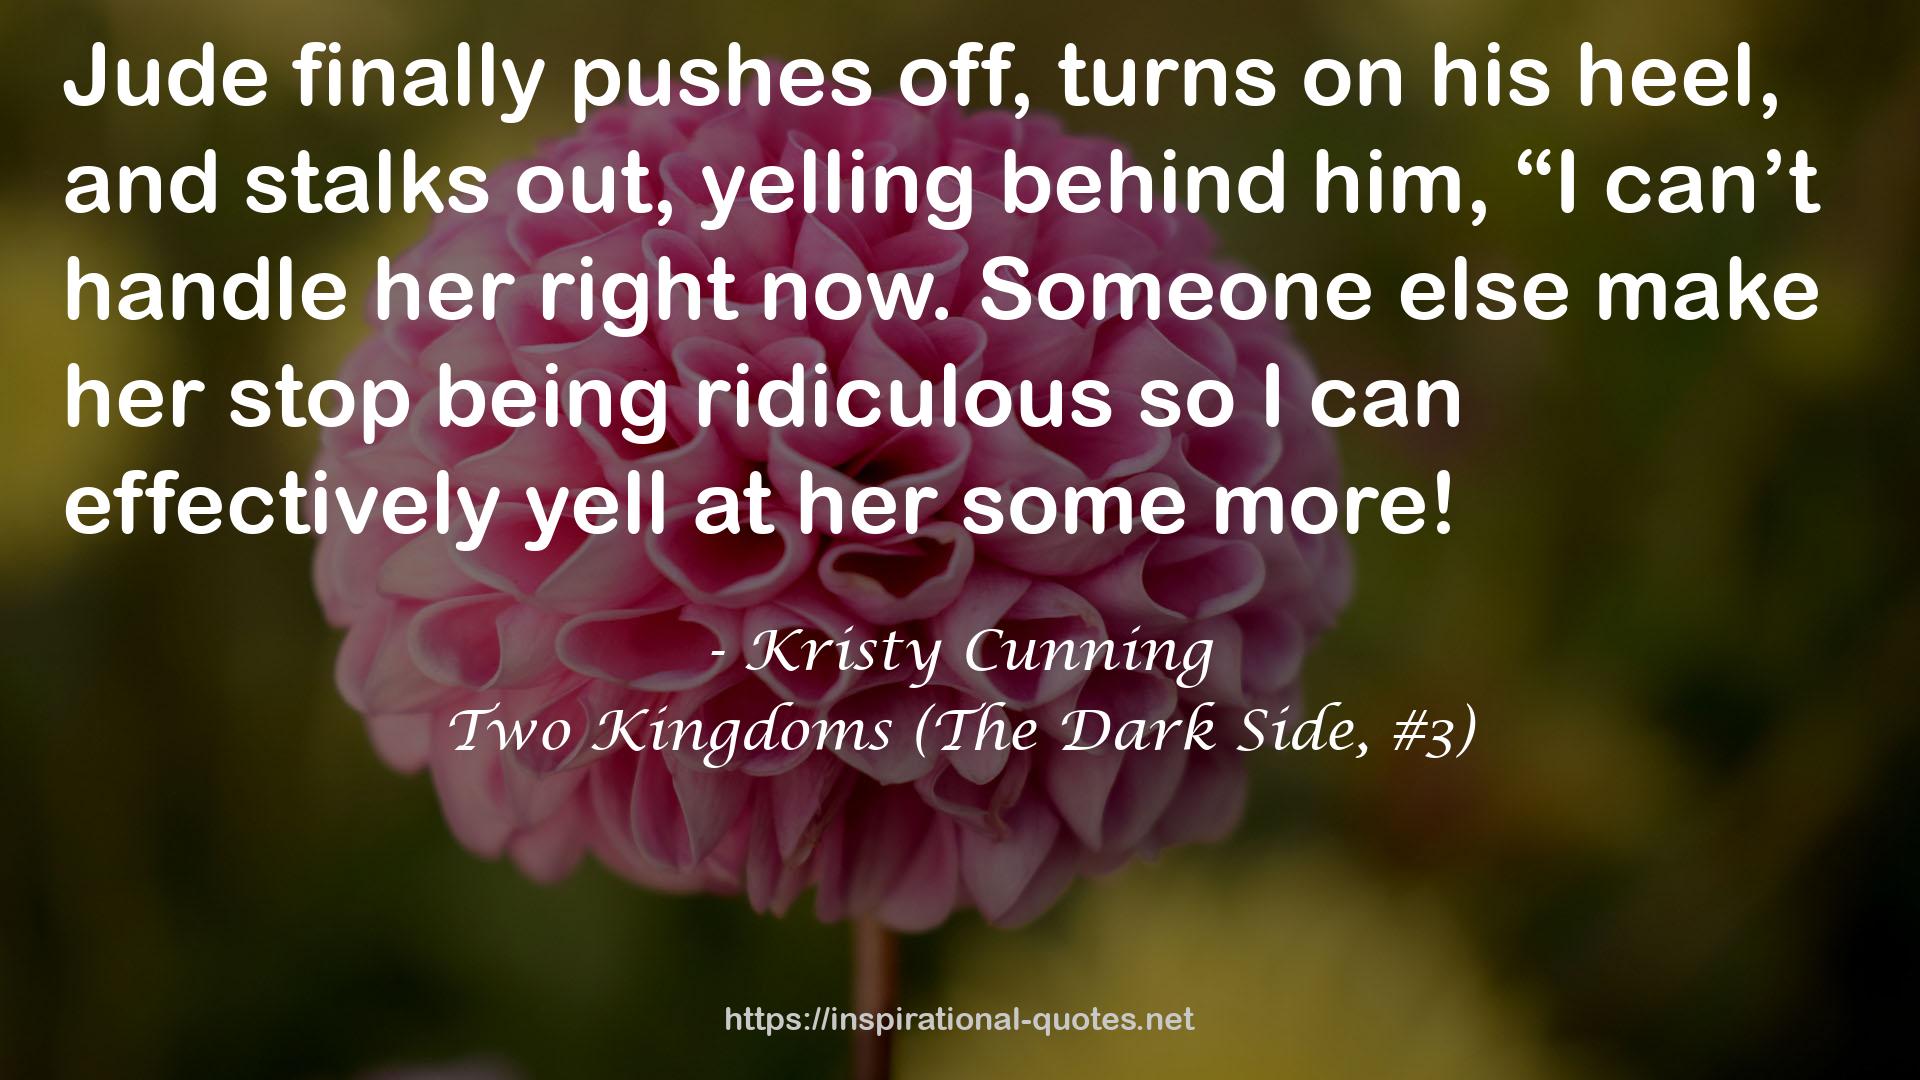 Two Kingdoms (The Dark Side, #3) QUOTES